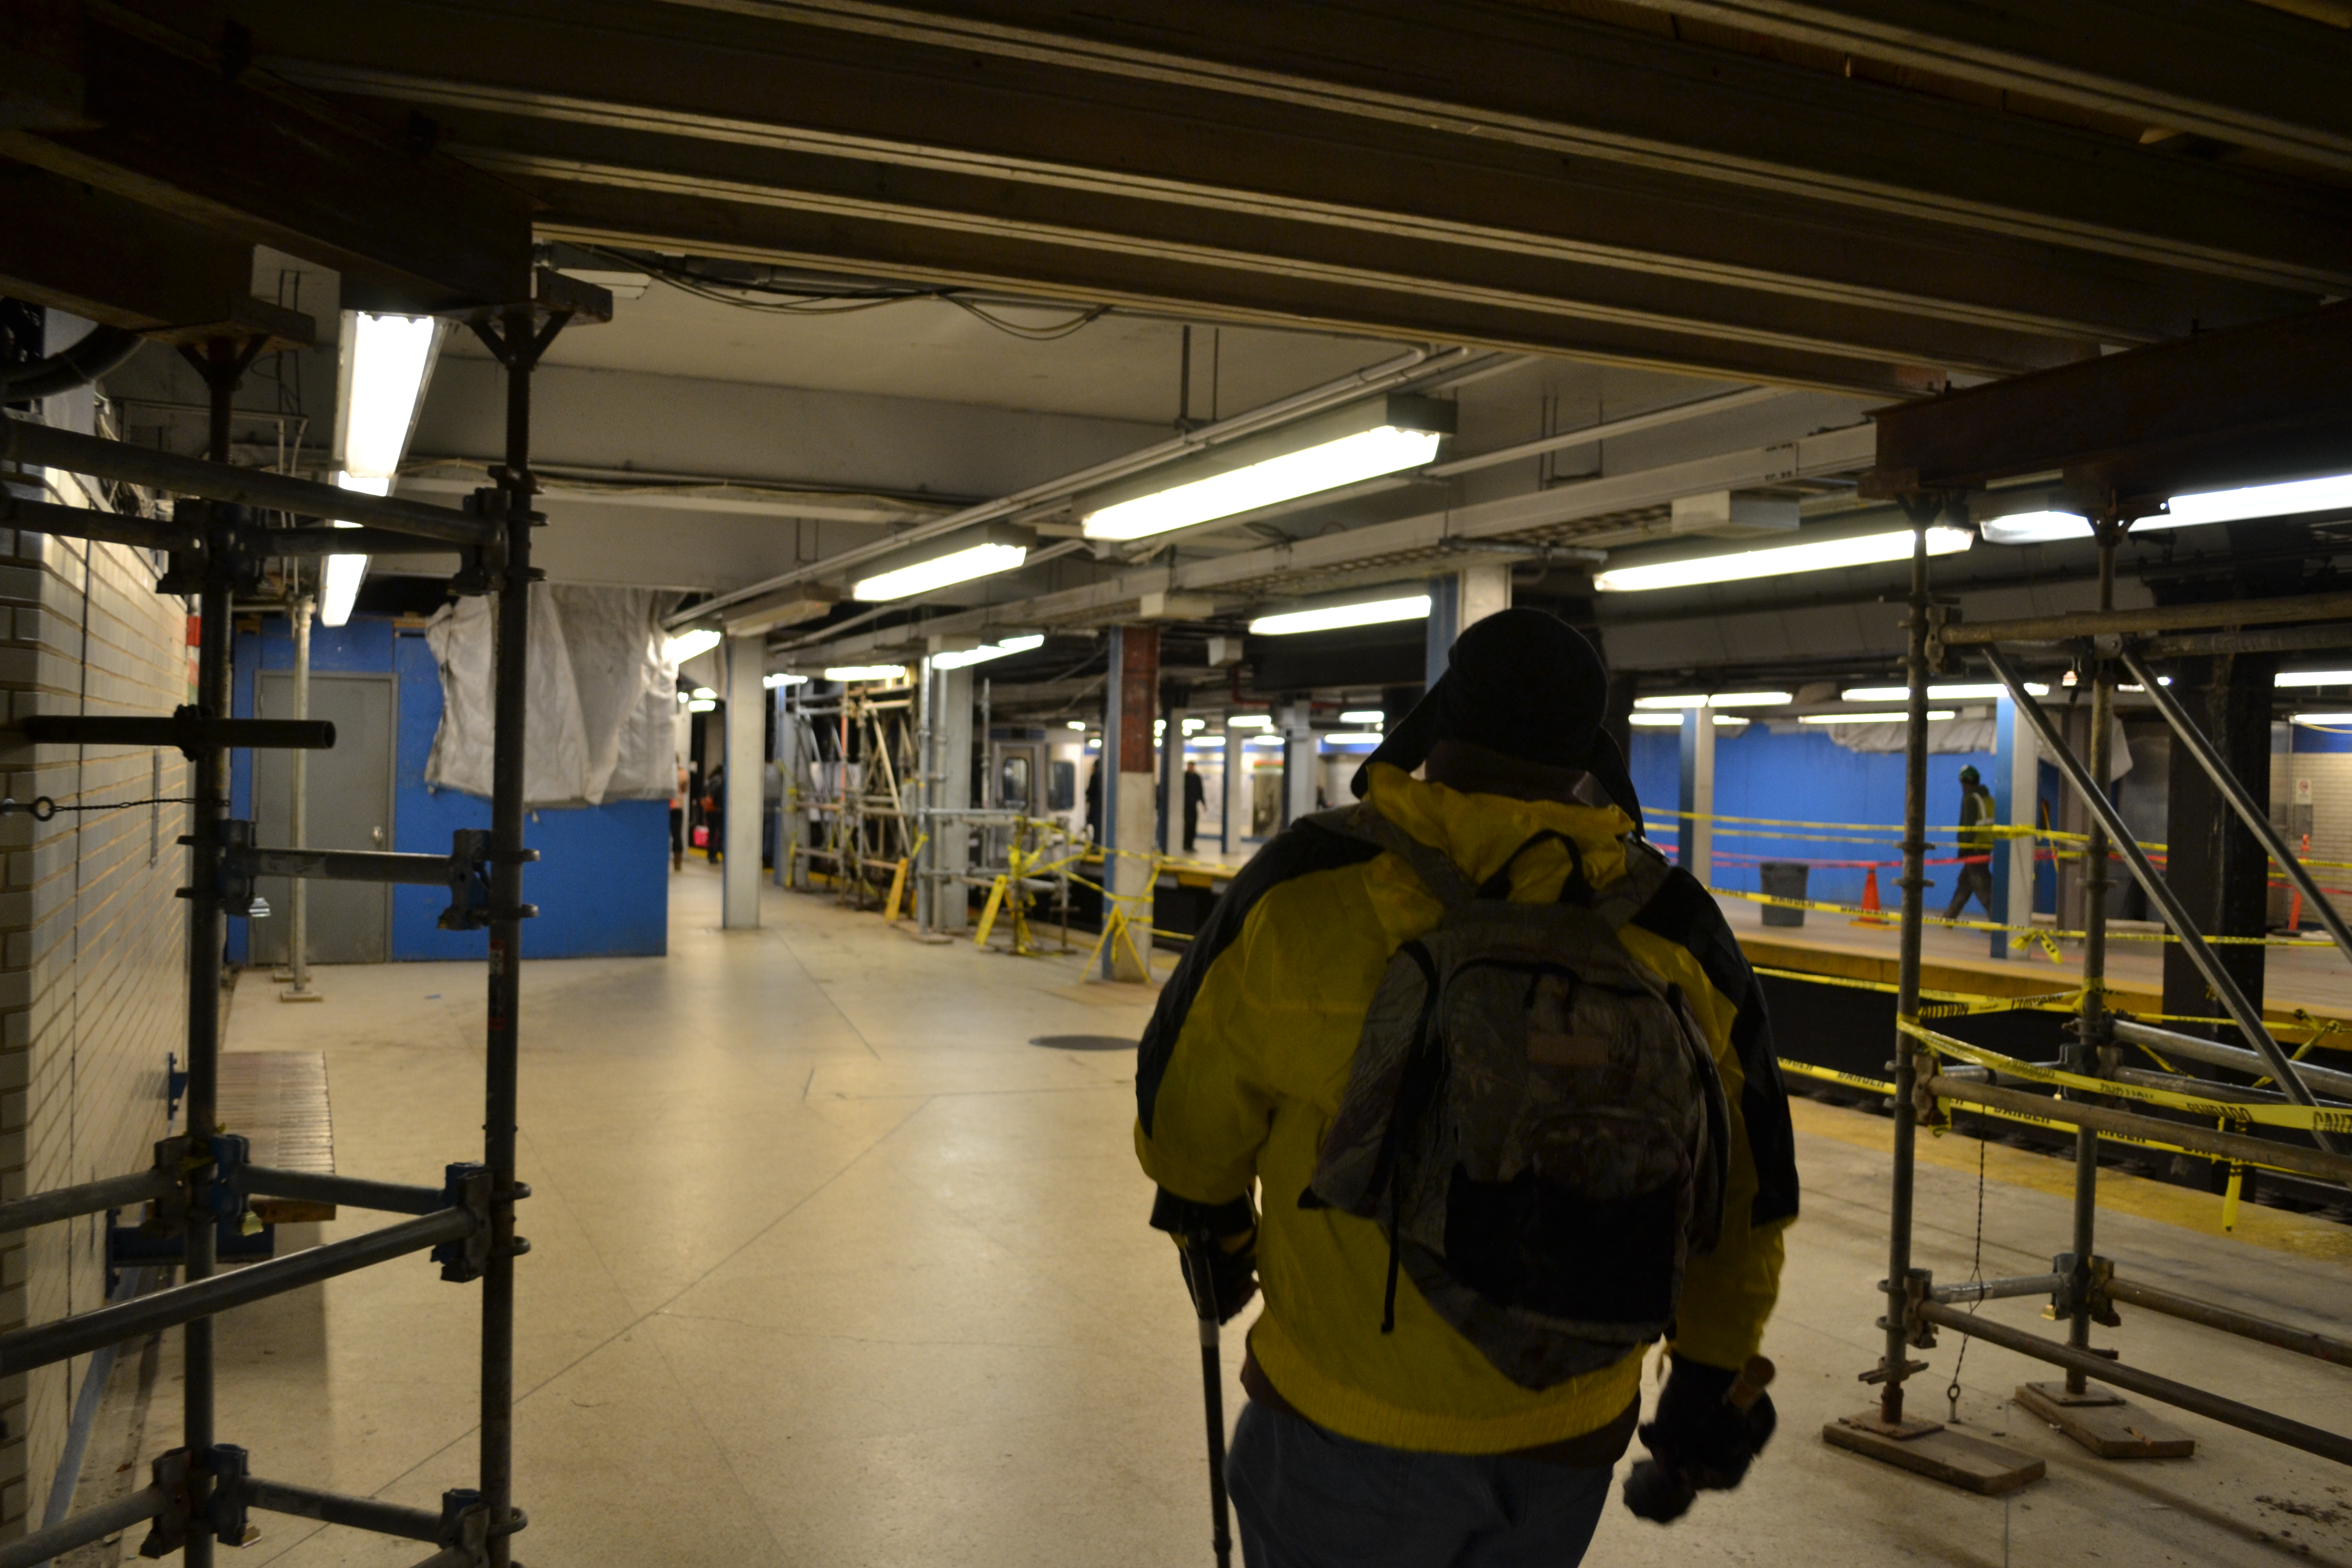 Scaffolding and temporary walls block portions of the MFL platform at 15th Street Station